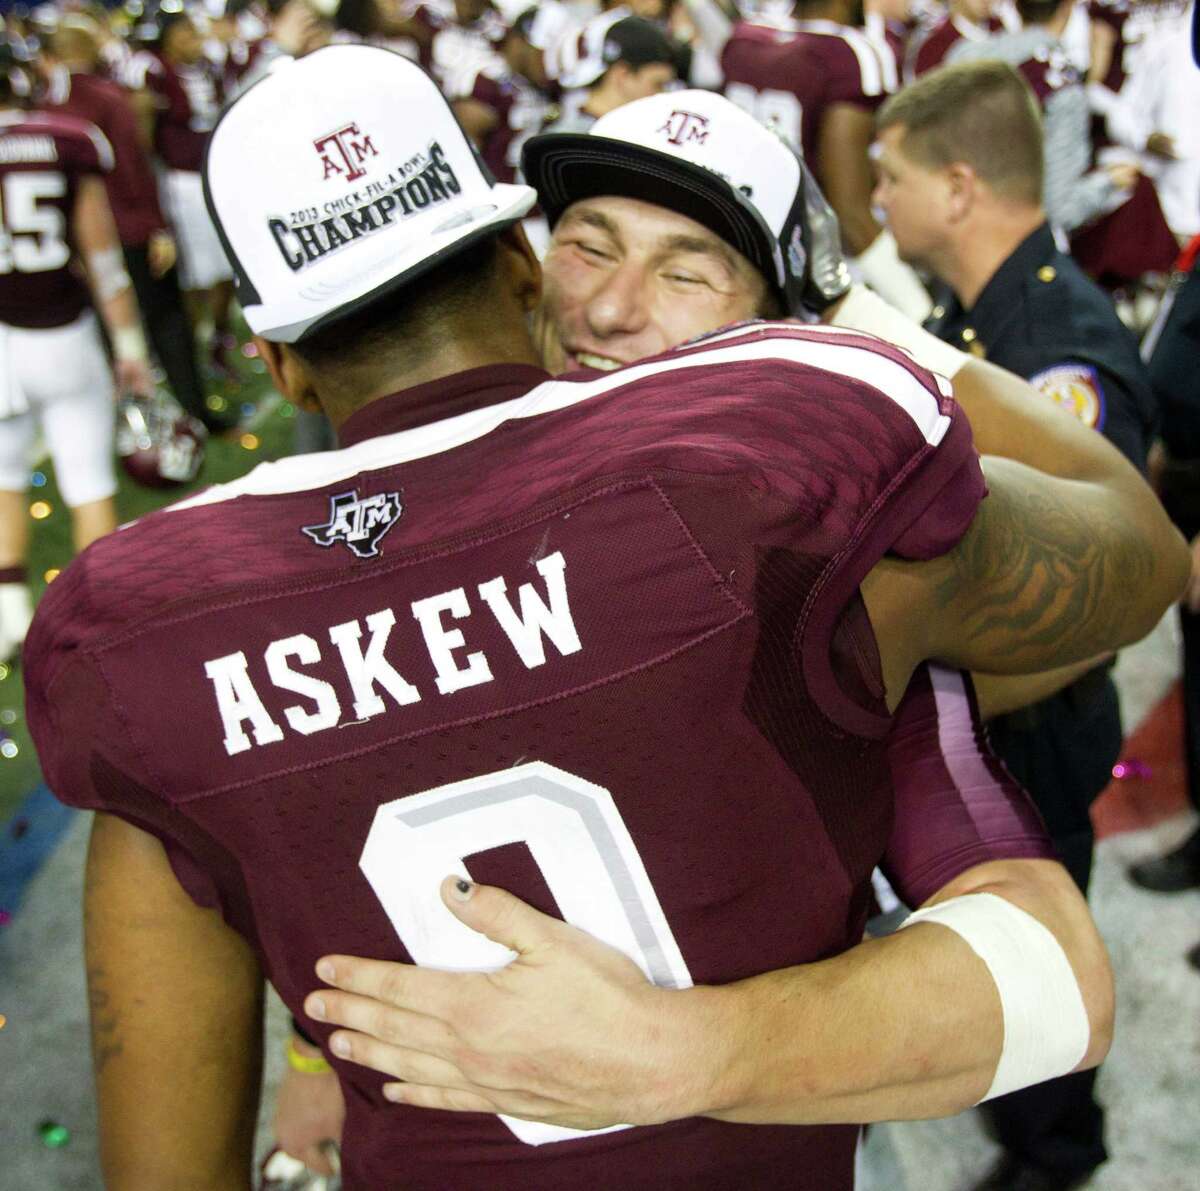 Johnny Manziel, right, and senior linebacker Nate Askew enjoy the Aggies' victory Tuesday night in what was definitely Askew's final college game and probably the finale for the redshirt sophomore quarterback as well.